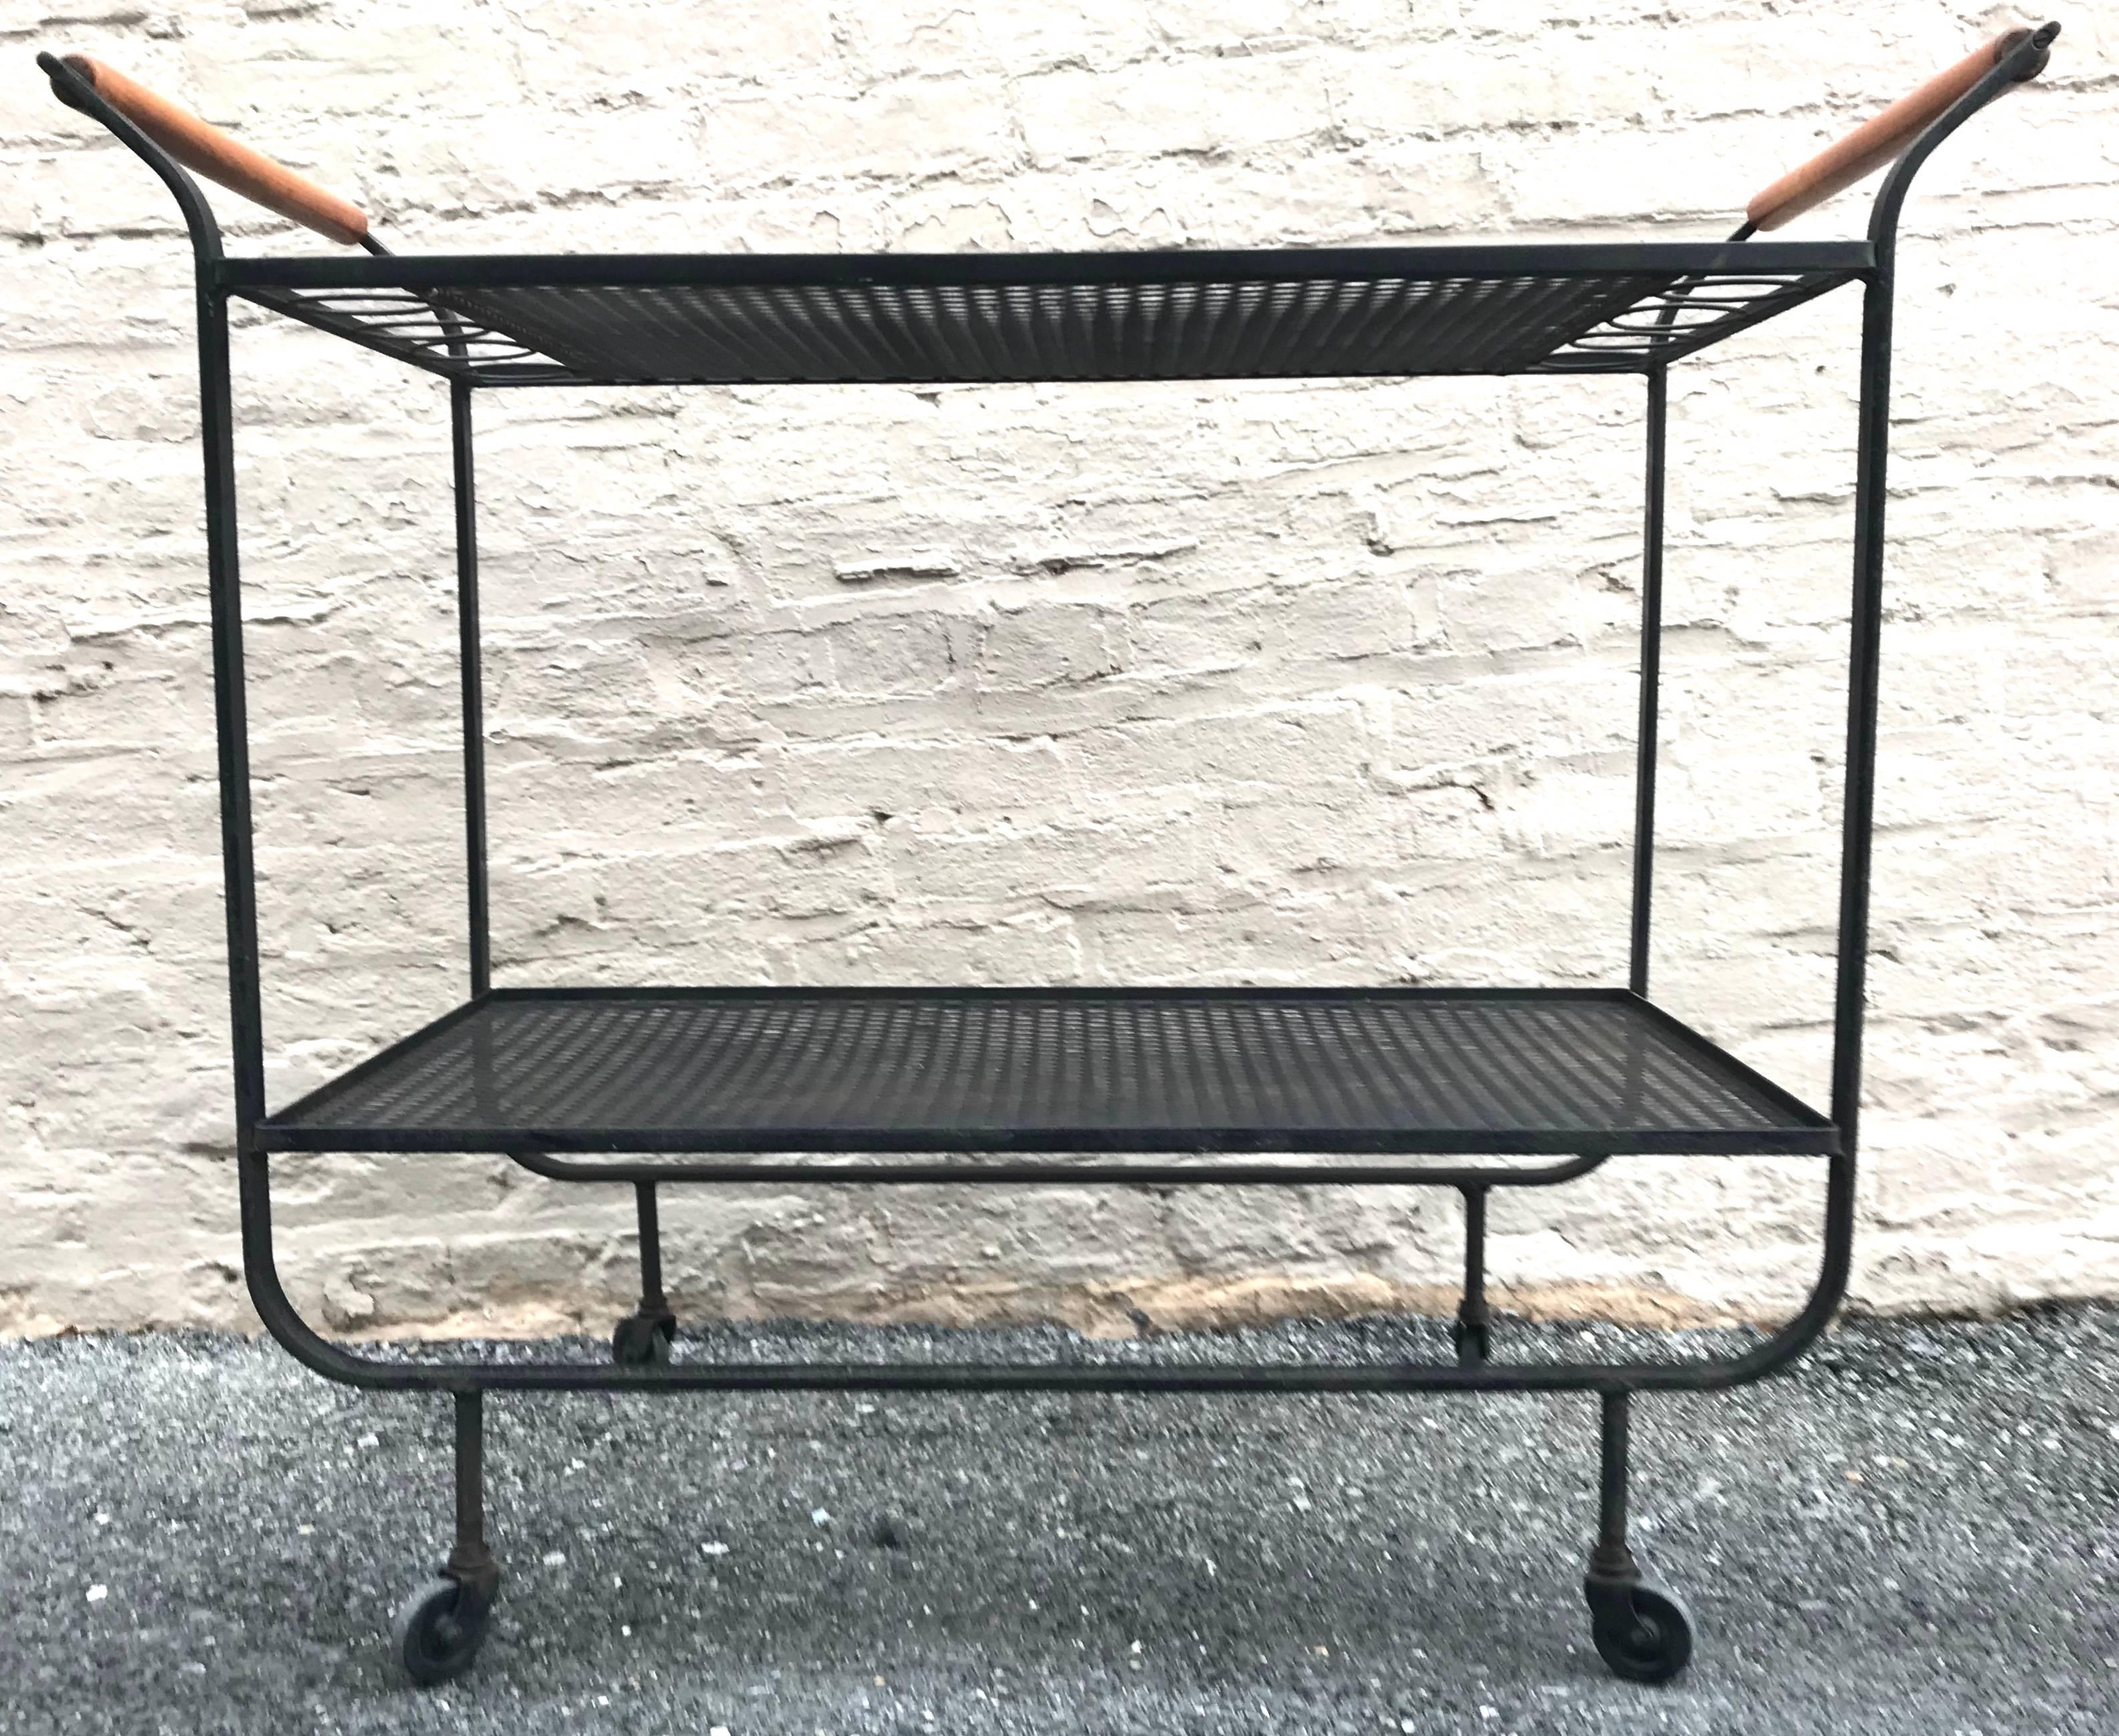 Rare early 1950s American modernist Frederick Weinberg wrought iron bar cart with wood handles. Graceful, elegant late Art Deco inspired design.